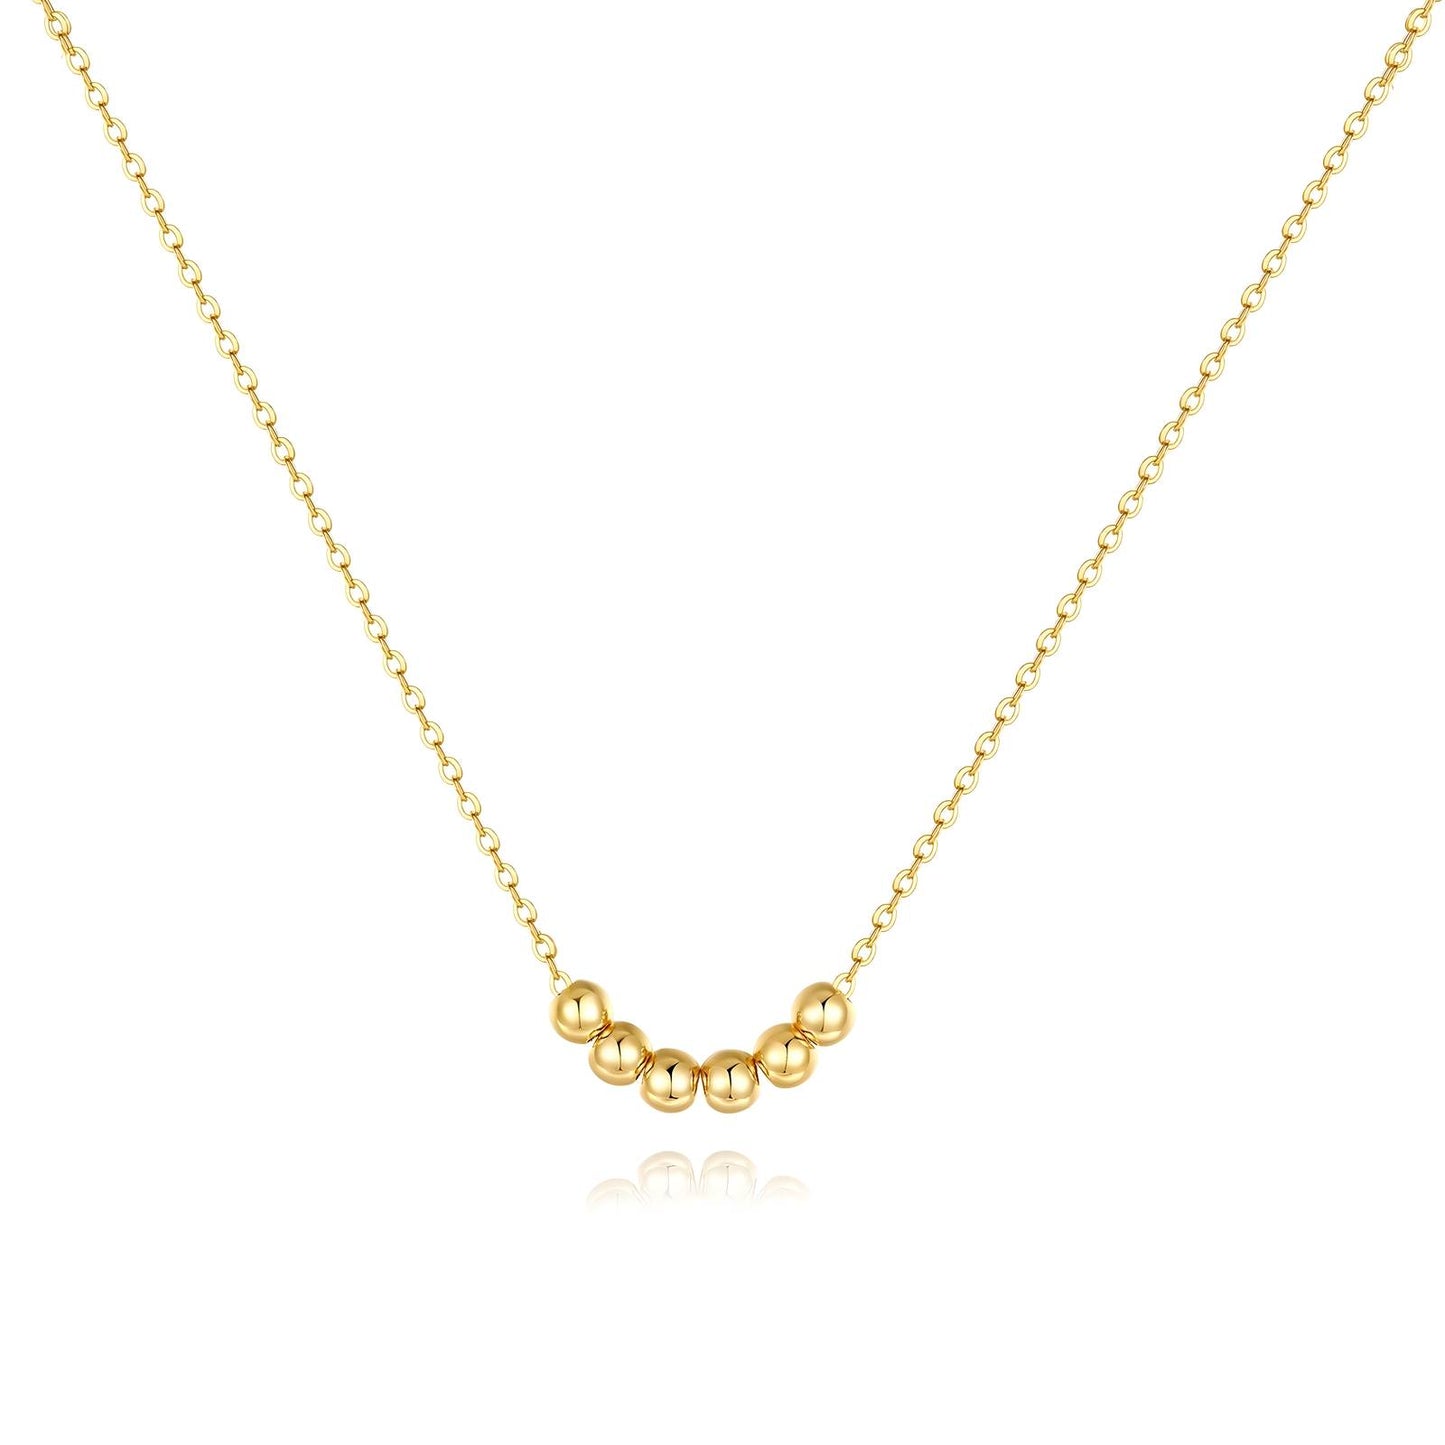 Floating with me gold necklace